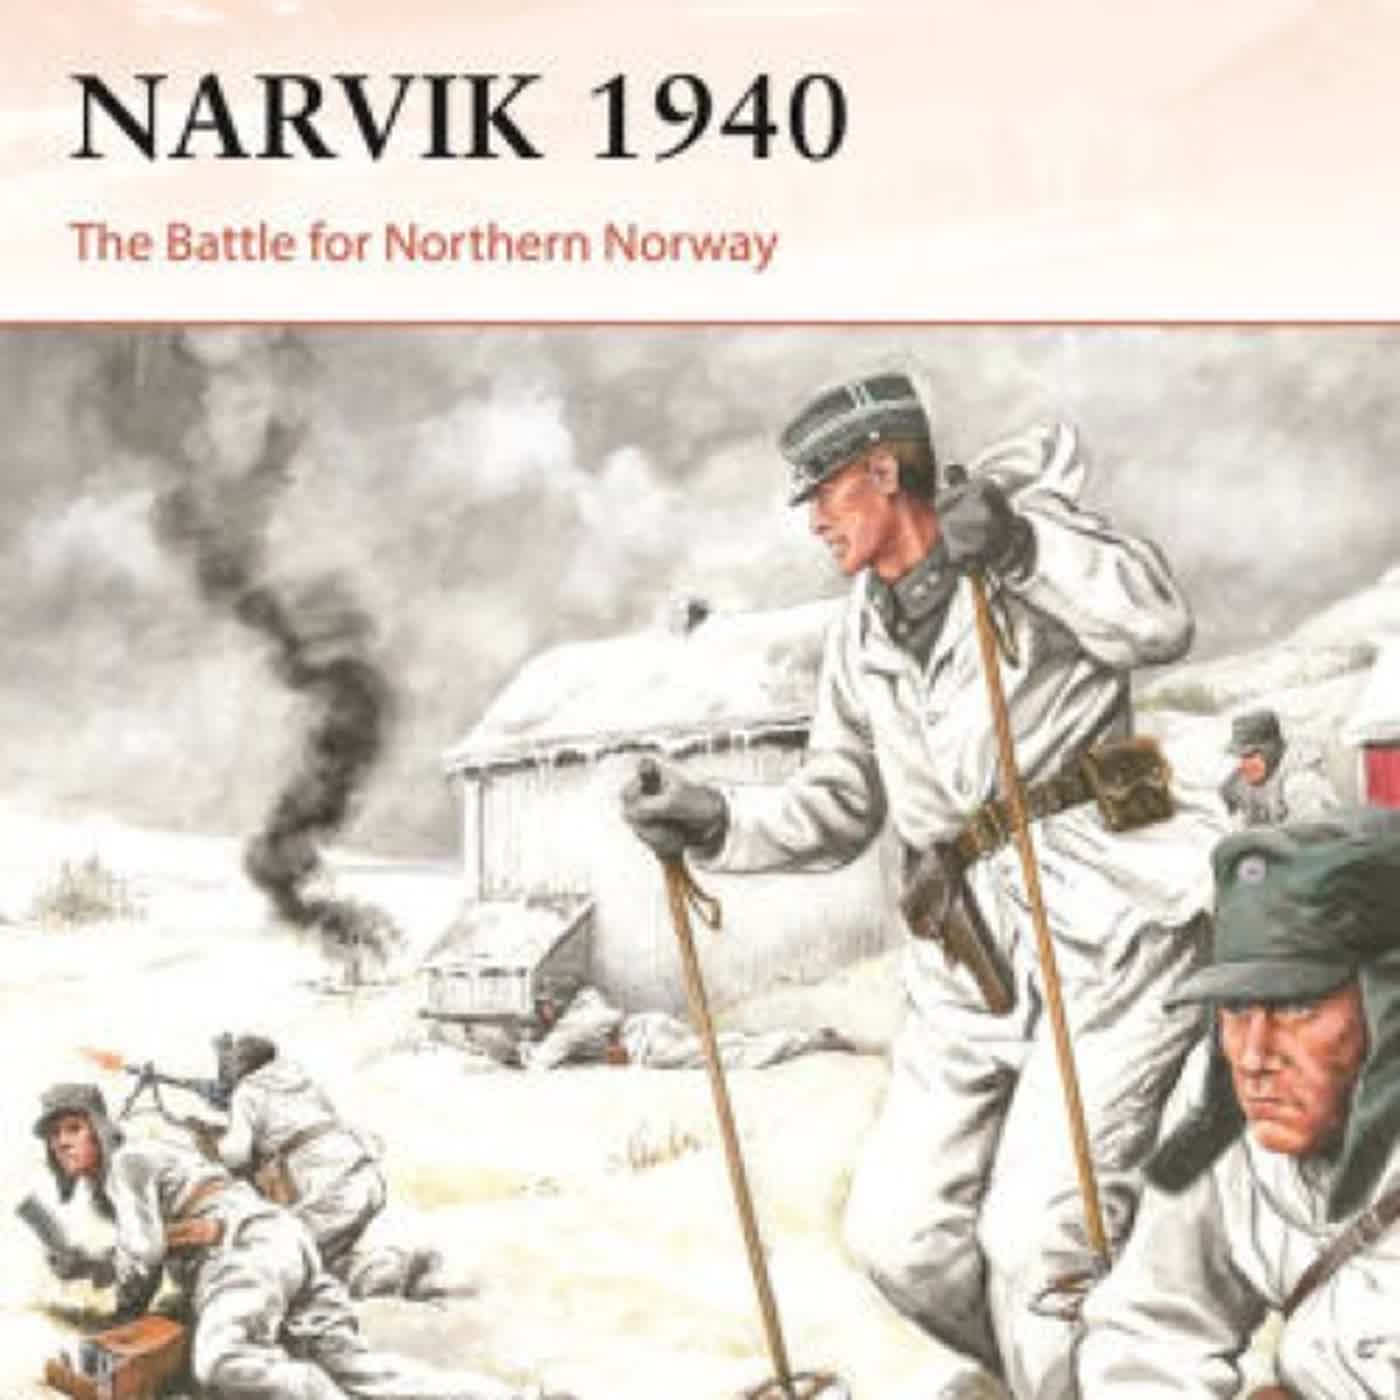 PDF [Download] Narvik 1940: The Battle for Northern Norway by David Greentree, Ramiro Bujeiro